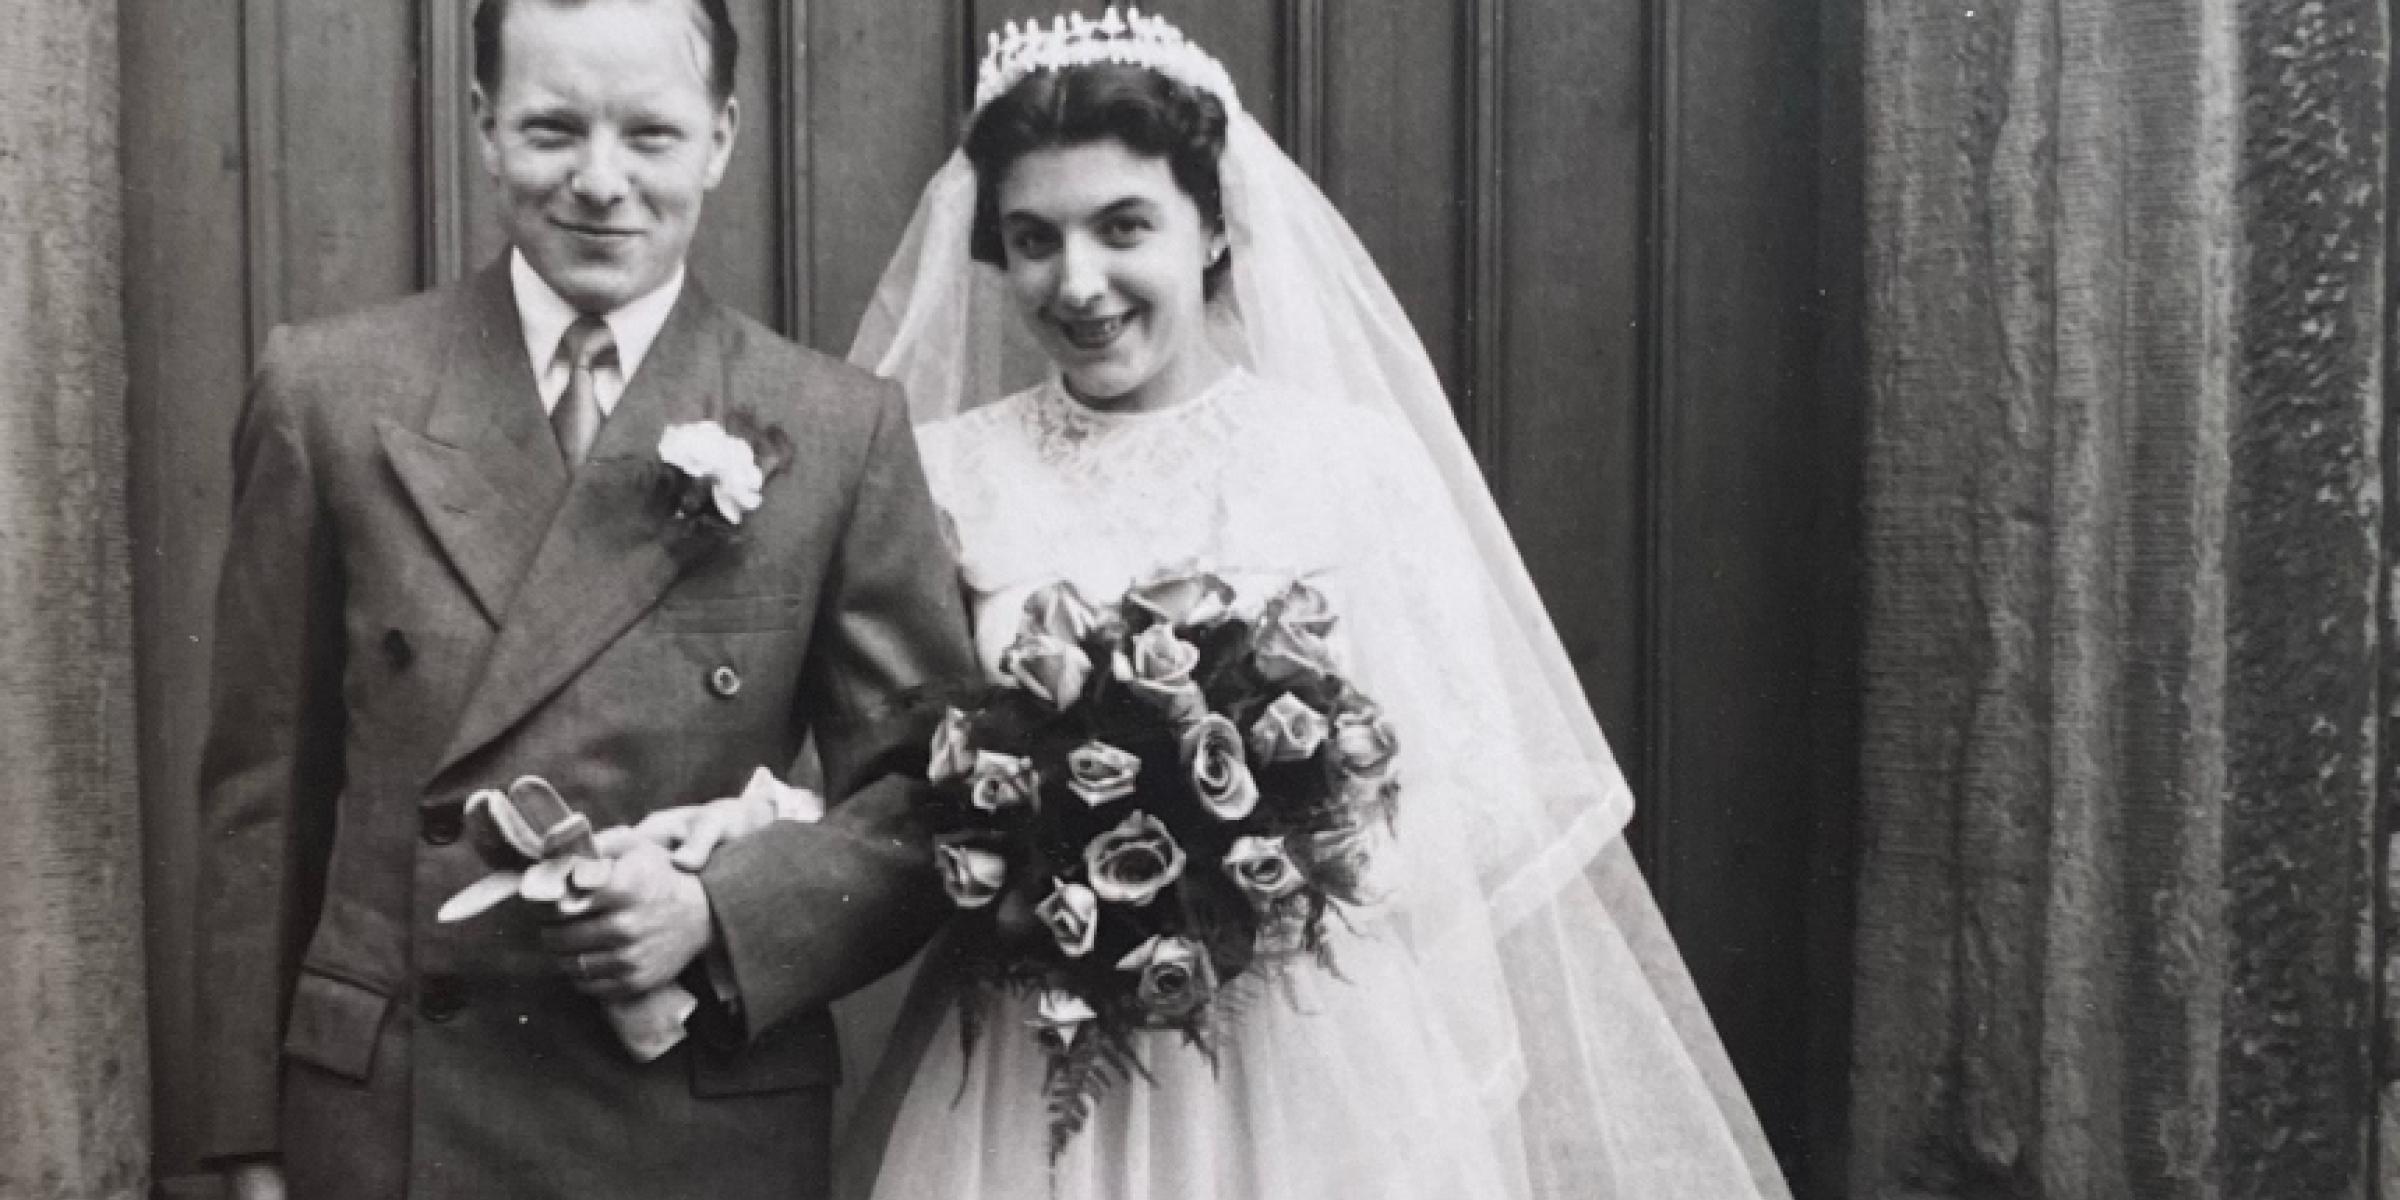 A black and white photo of Barbara and Peter standing together arms linked in their wedding clothes